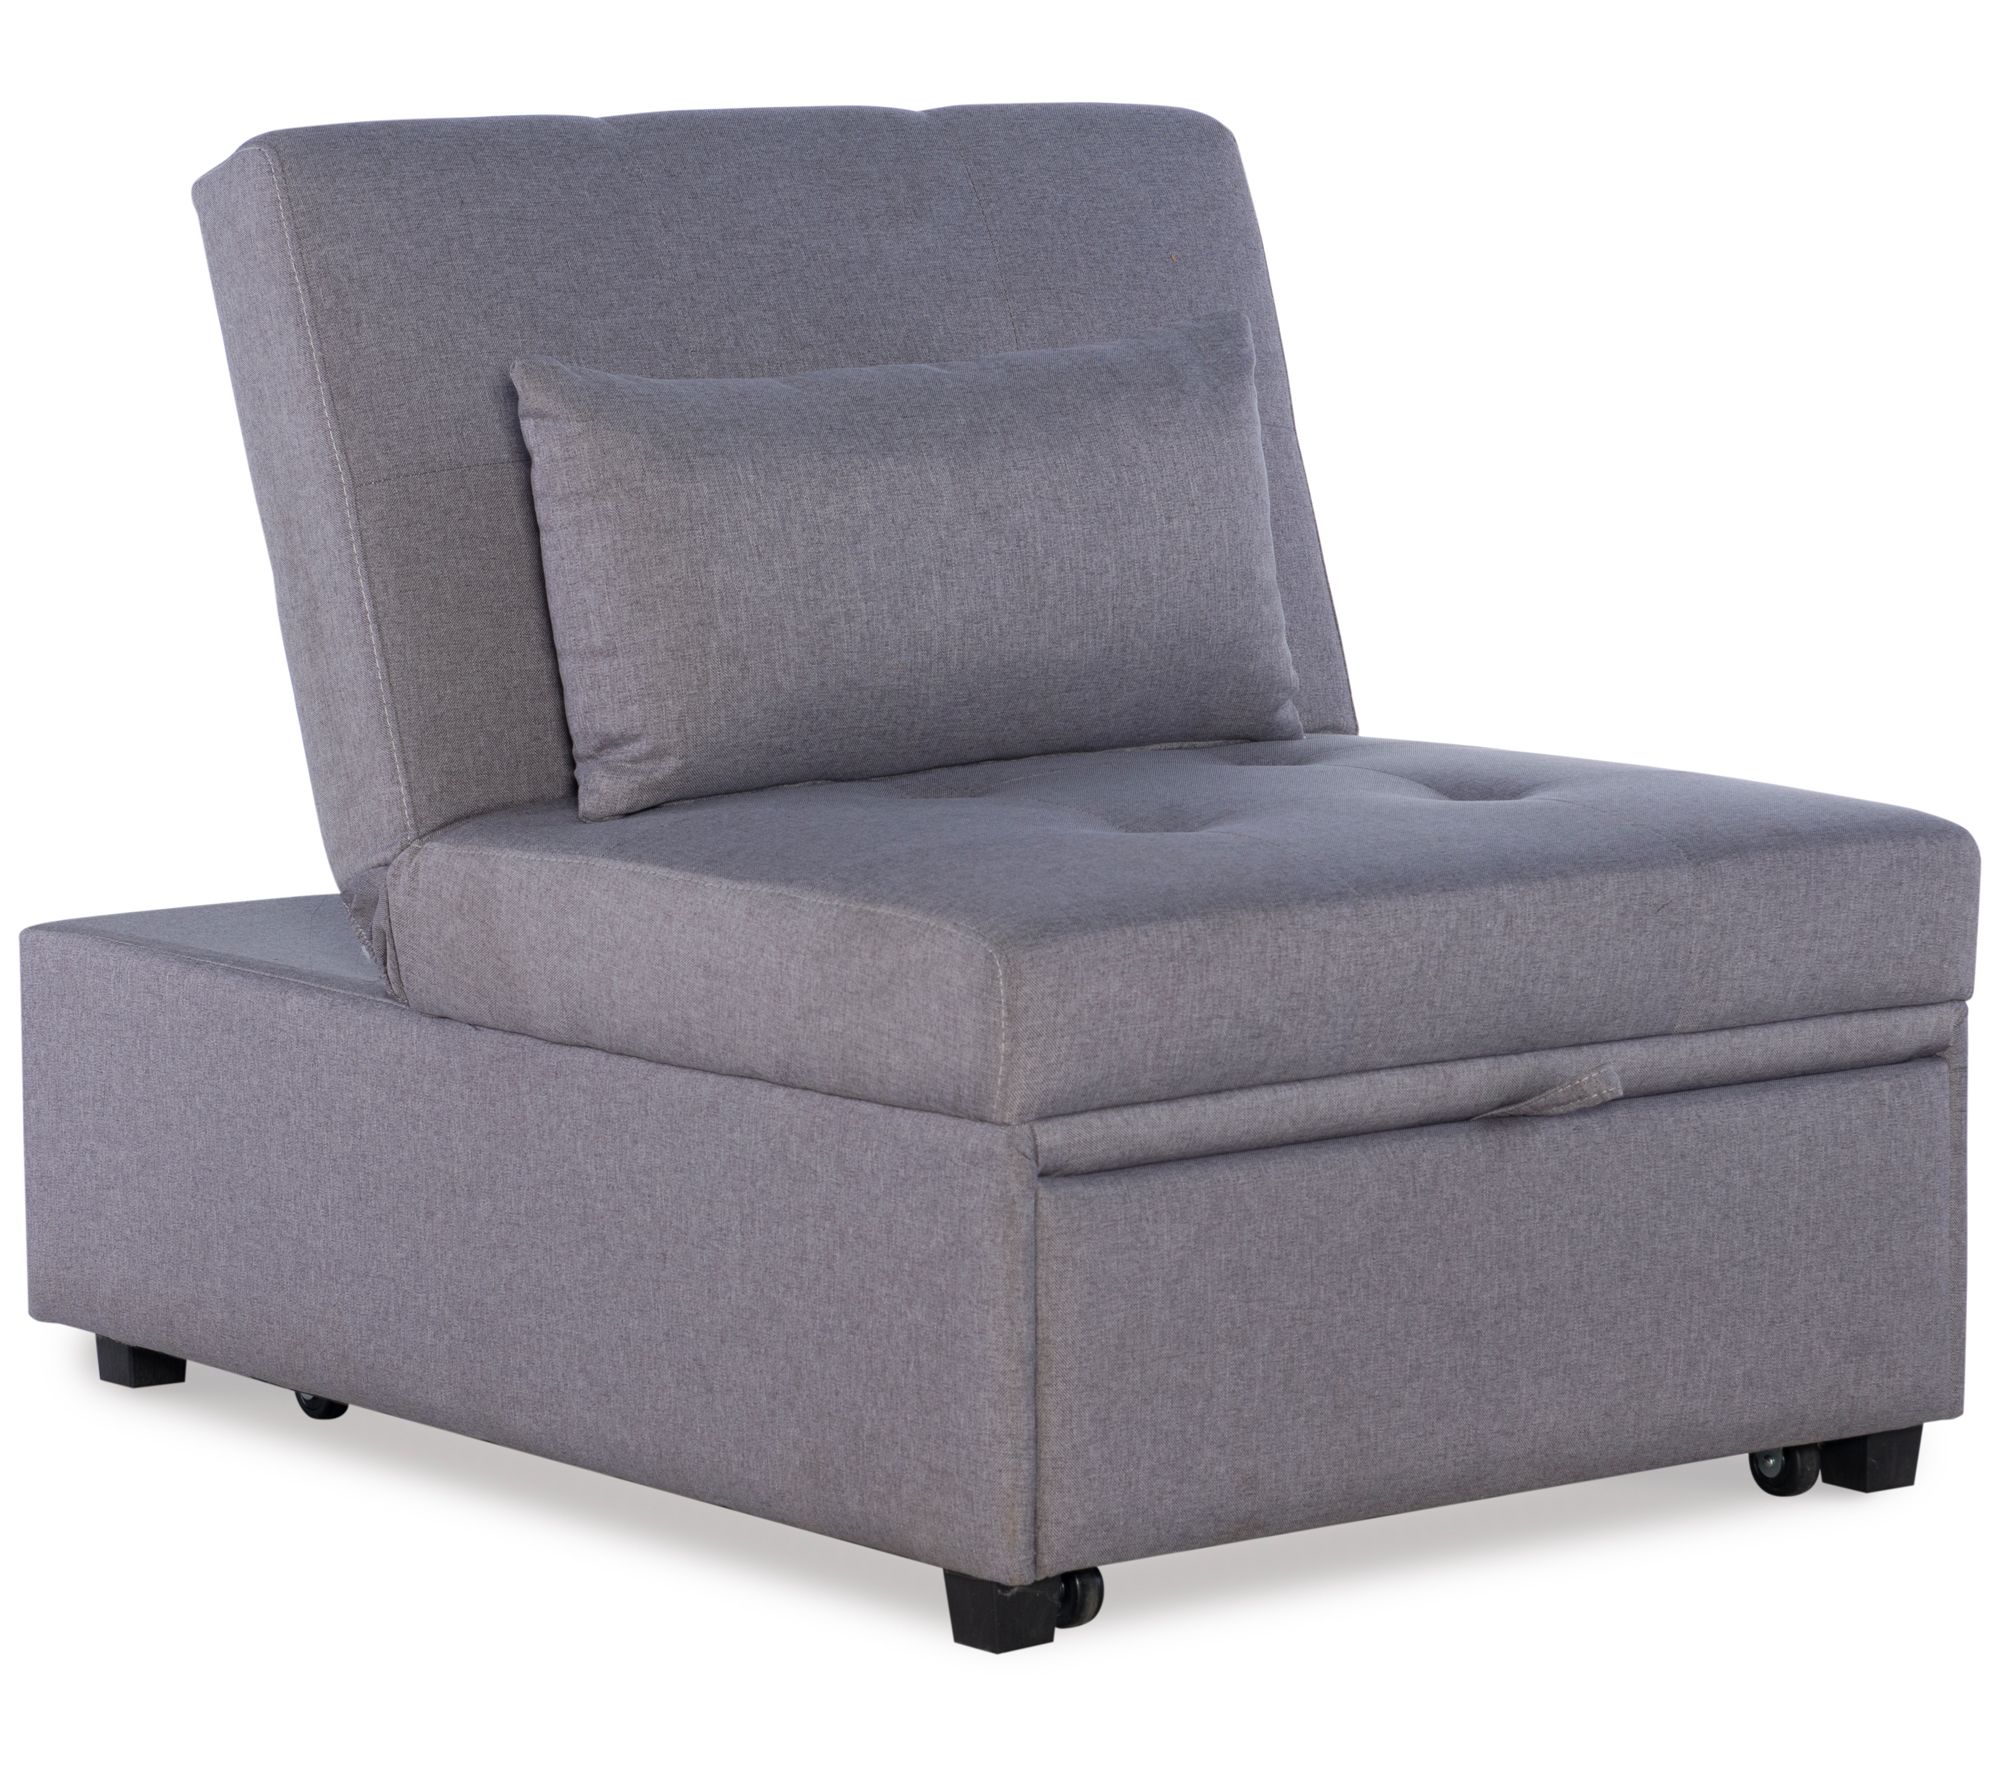 Dozer Convertible Twin Sofa Bed Qvc Com, Oversized Chair That Turns Into A Twin Bed